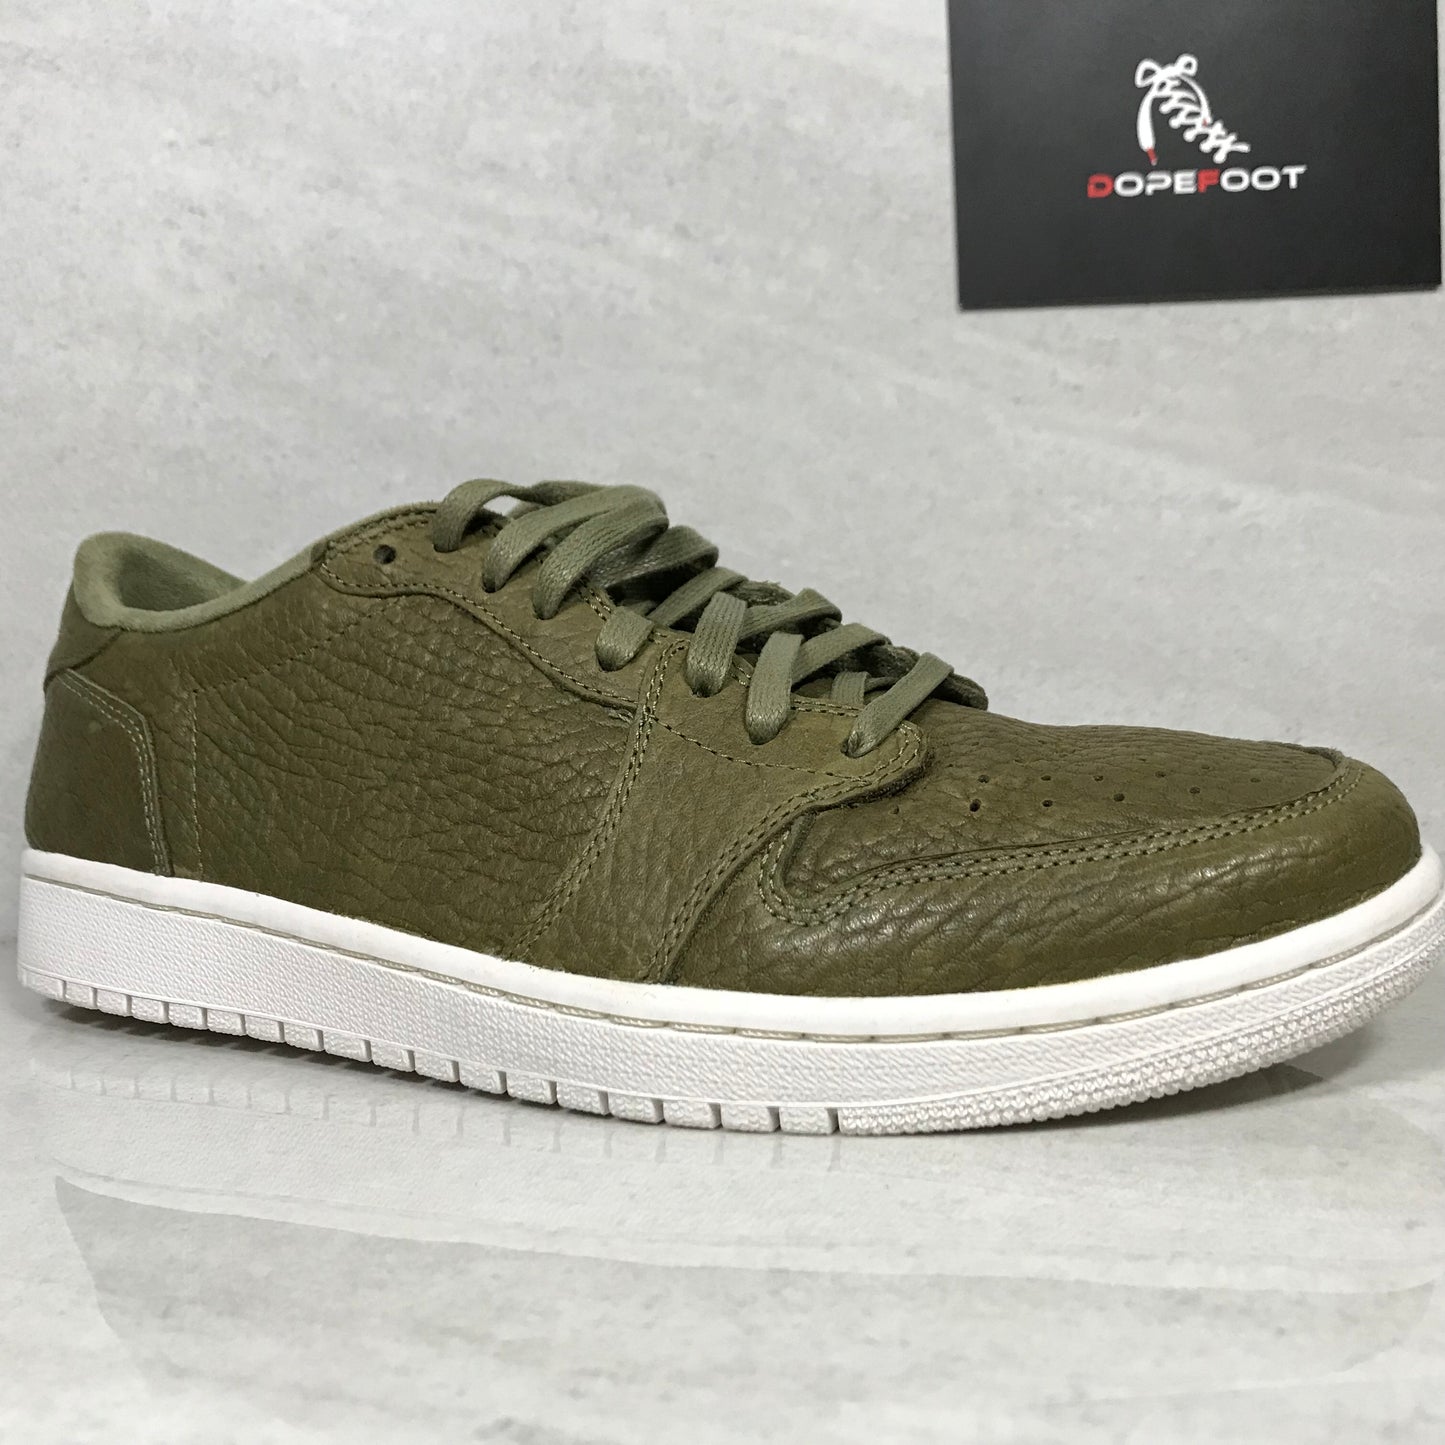 Air Jordan 1 I Retro Low Swooshless Trooper Olive Green - 848775 205 - Taille 8.5/Taille 10